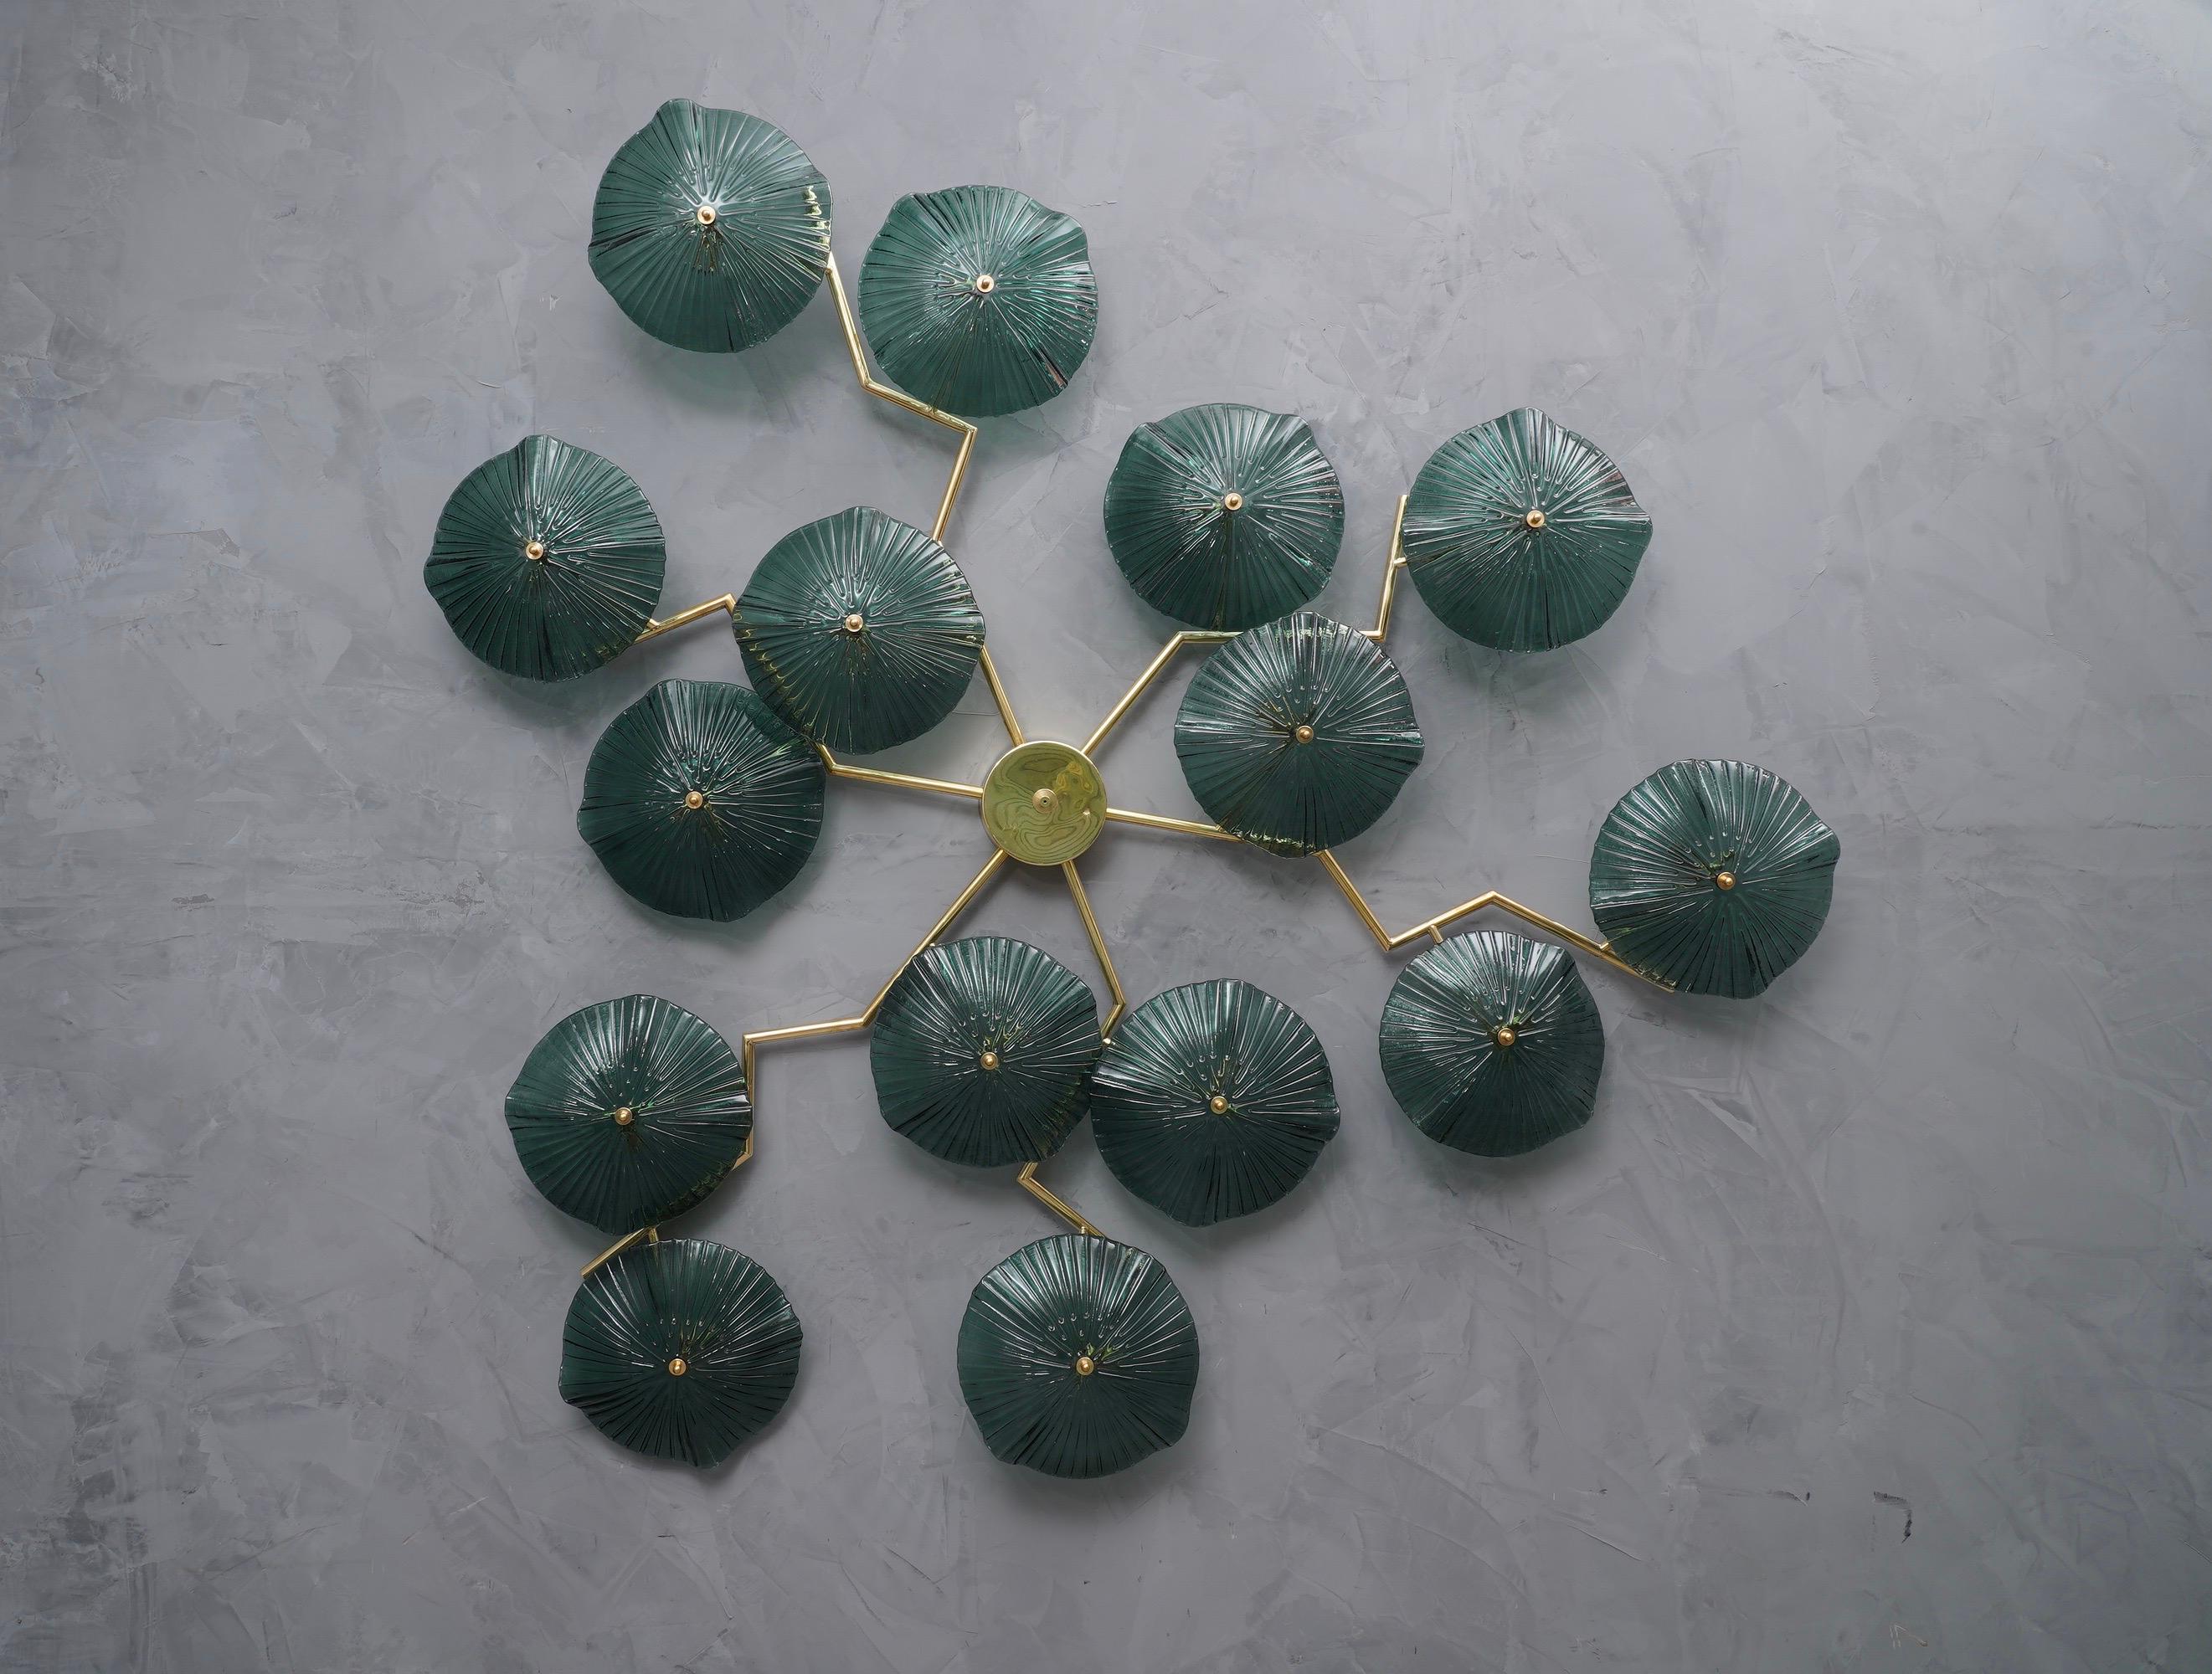 Wonderful piece of Murano that can be mounted both as a wall lamp and as a ceiling chandelier. Particular and original applique from the Murano glass factory.

The wall light/chandelier has a brass structure, in the shape of a climbing plant, which